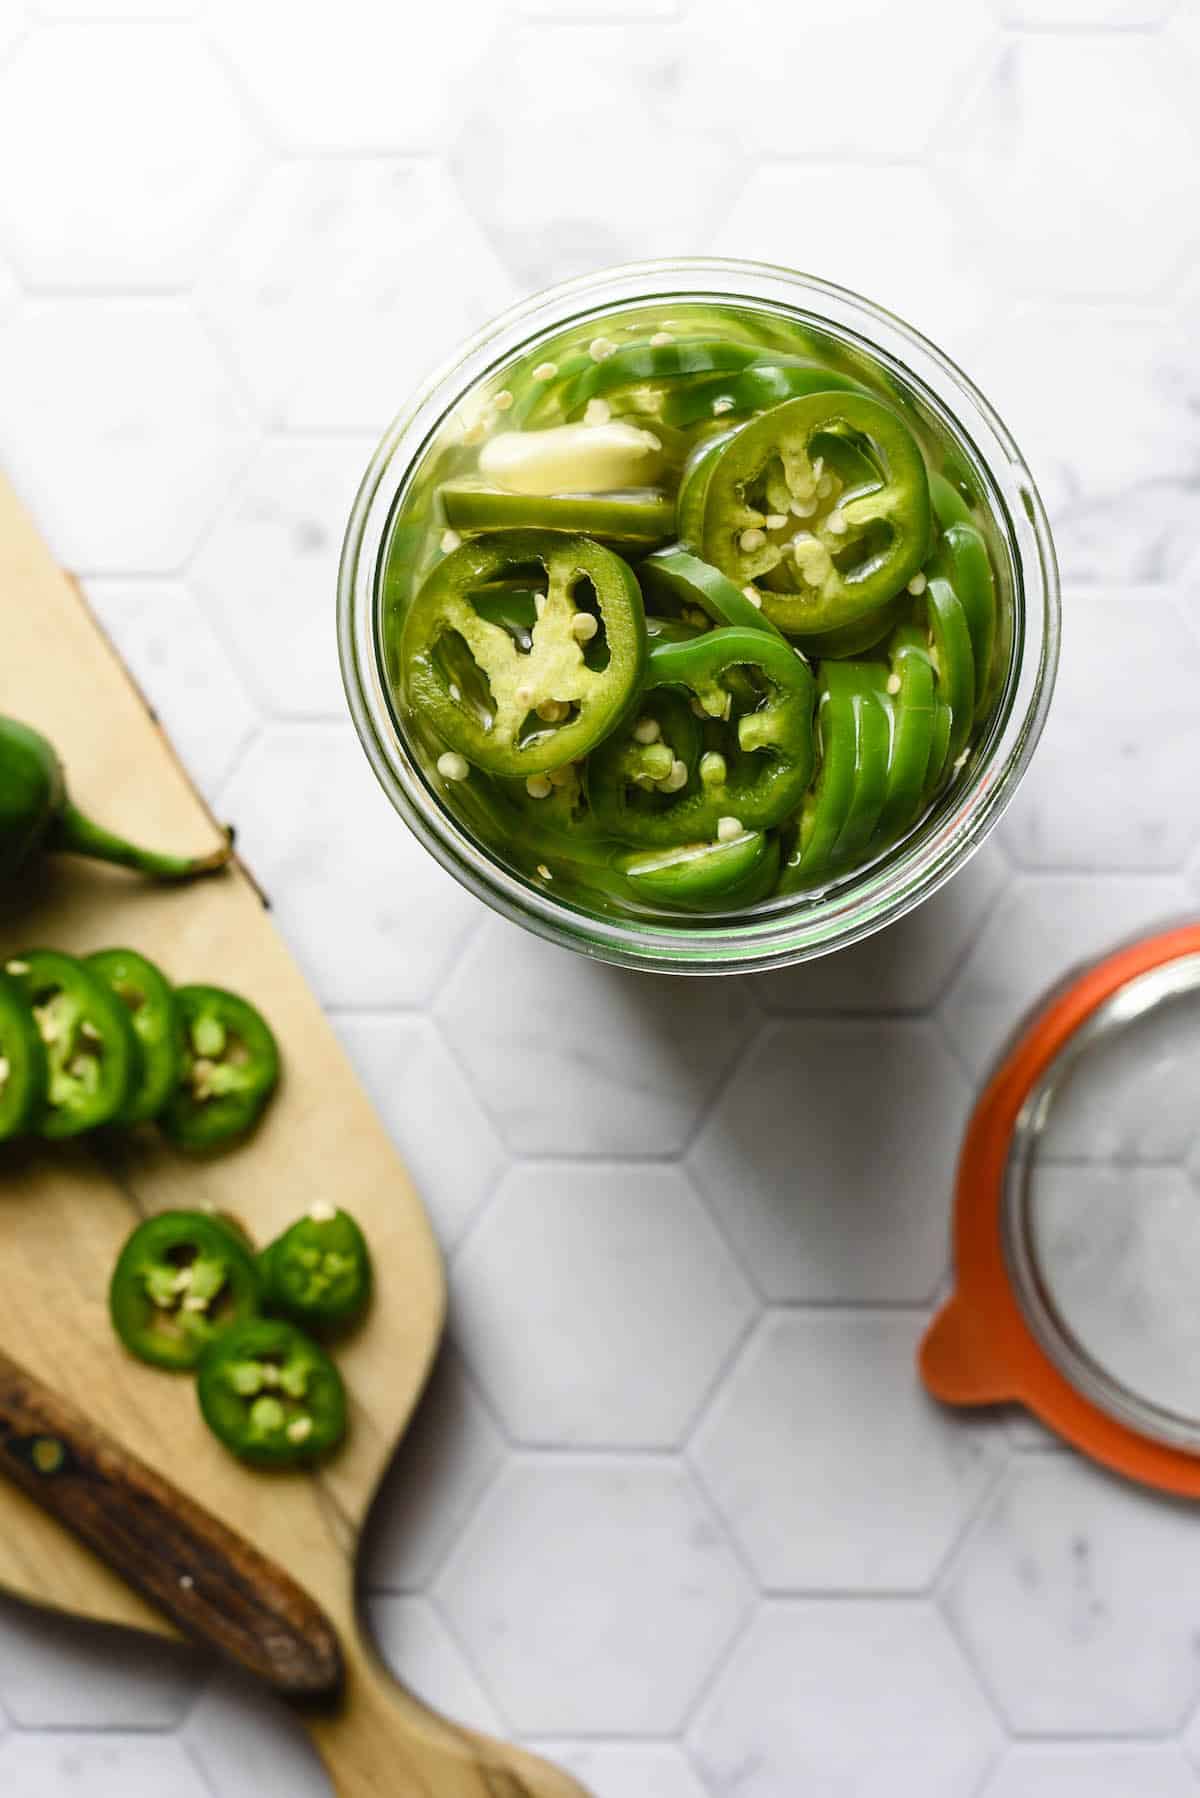 Jar of pickled jalapenos and small cutting board with knife against light background.